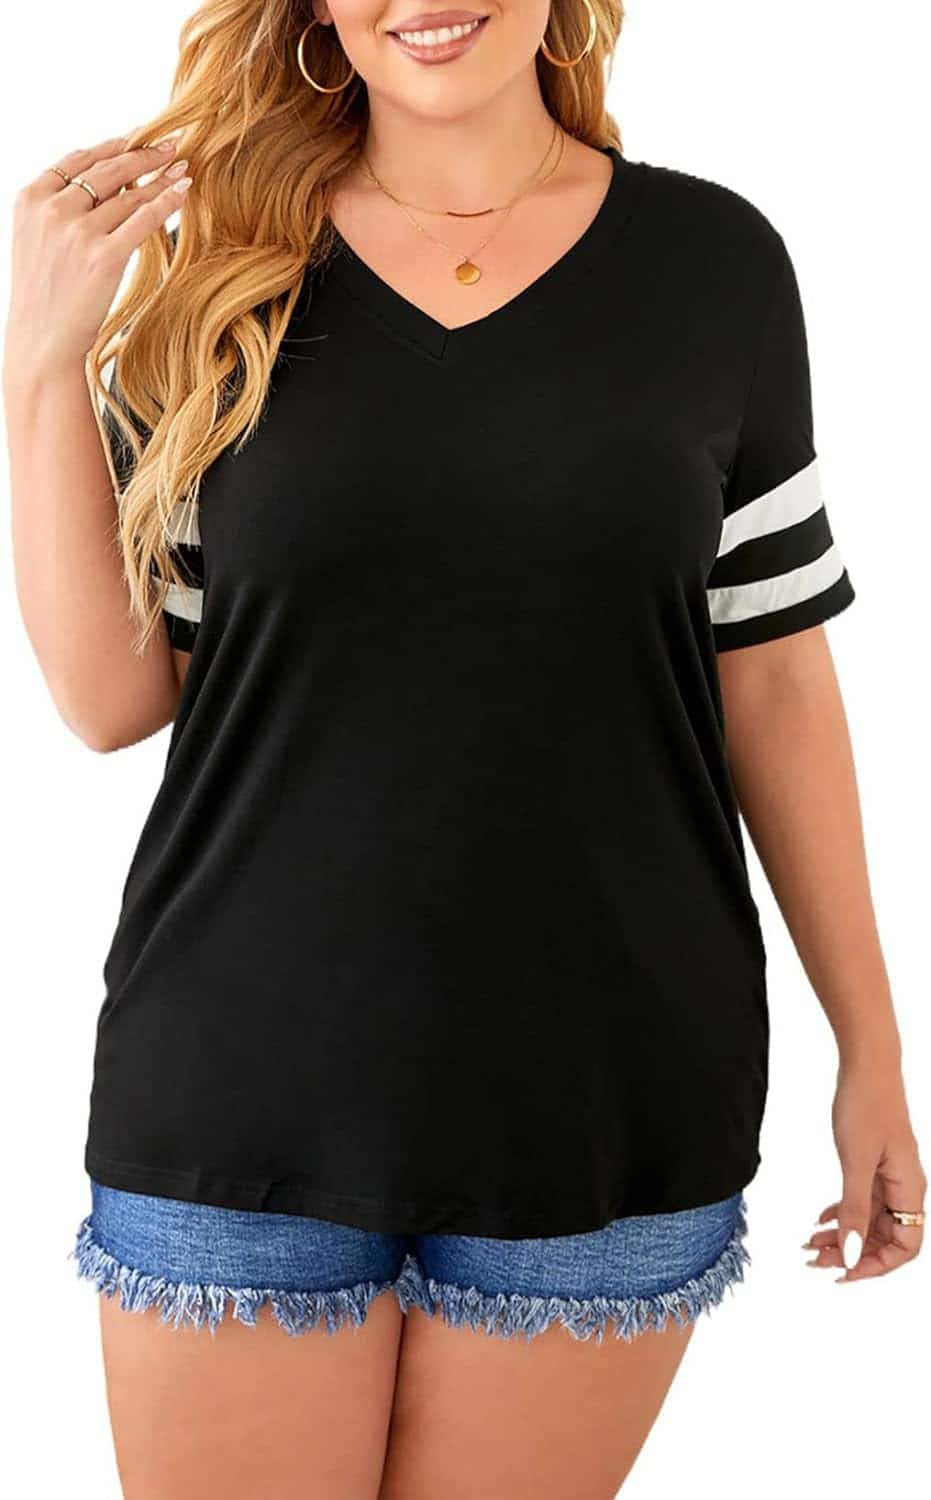 MyFav Women’s T-Shirts Plus Size Short Sleeve Crew Neck Striped Tee: A Review